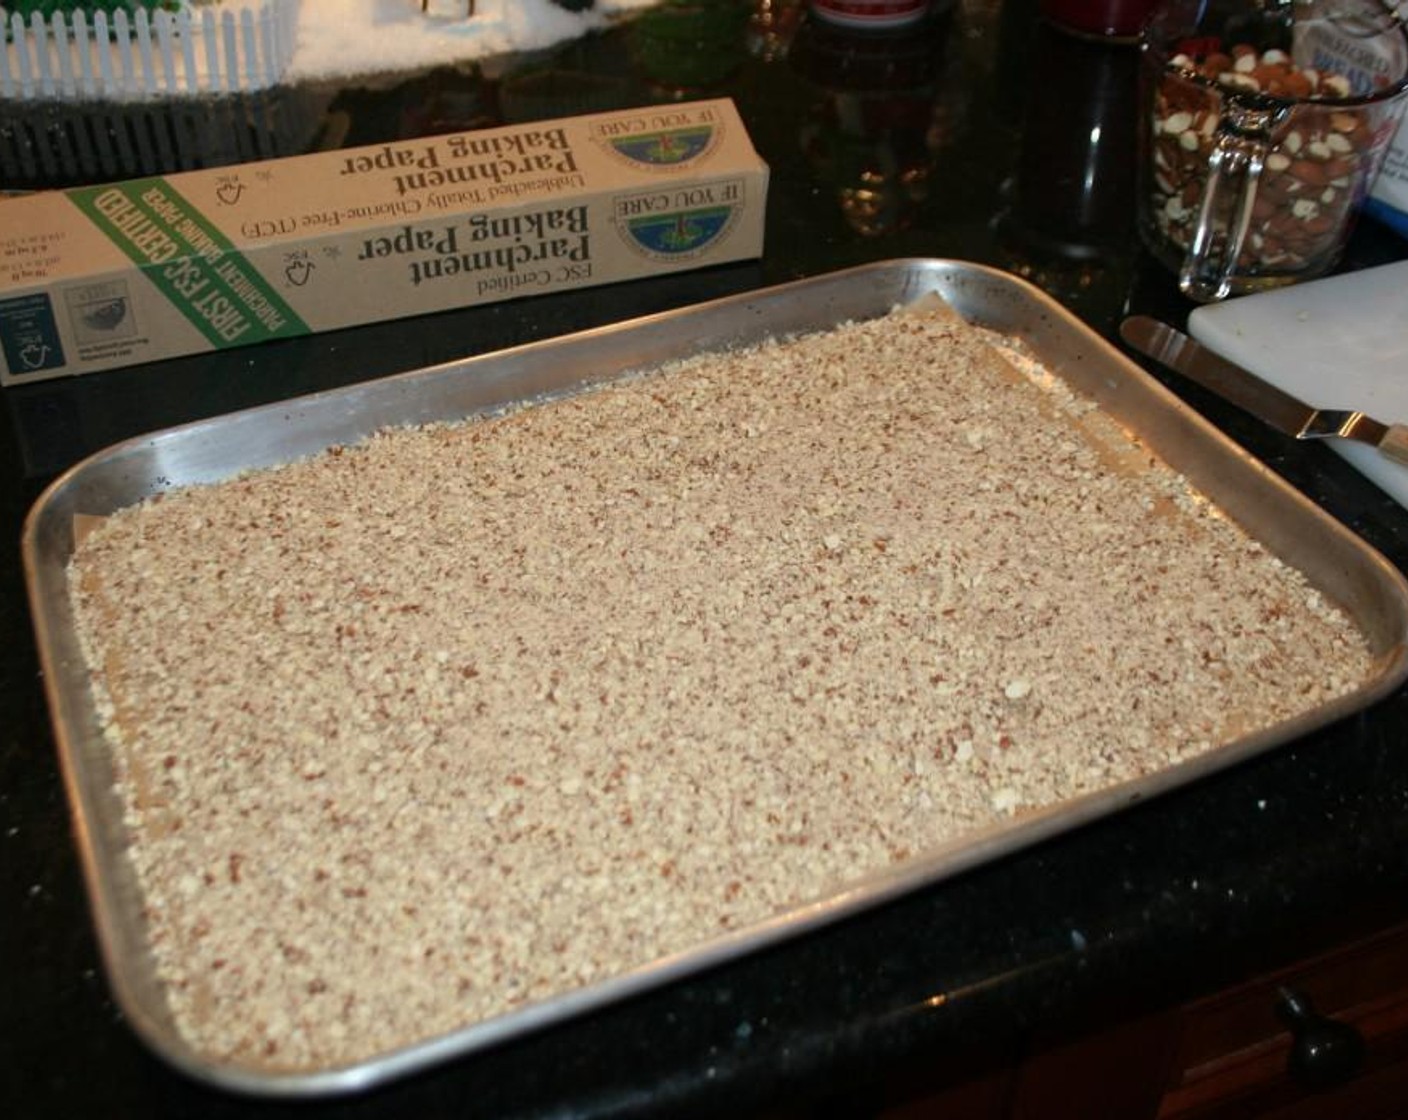 step 2 Line a baking sheet pan with parchment paper - set aside. In a food processor grind the remaining almonds into a coarse meal. Place almond meal on the baking sheet with the parchment paper.